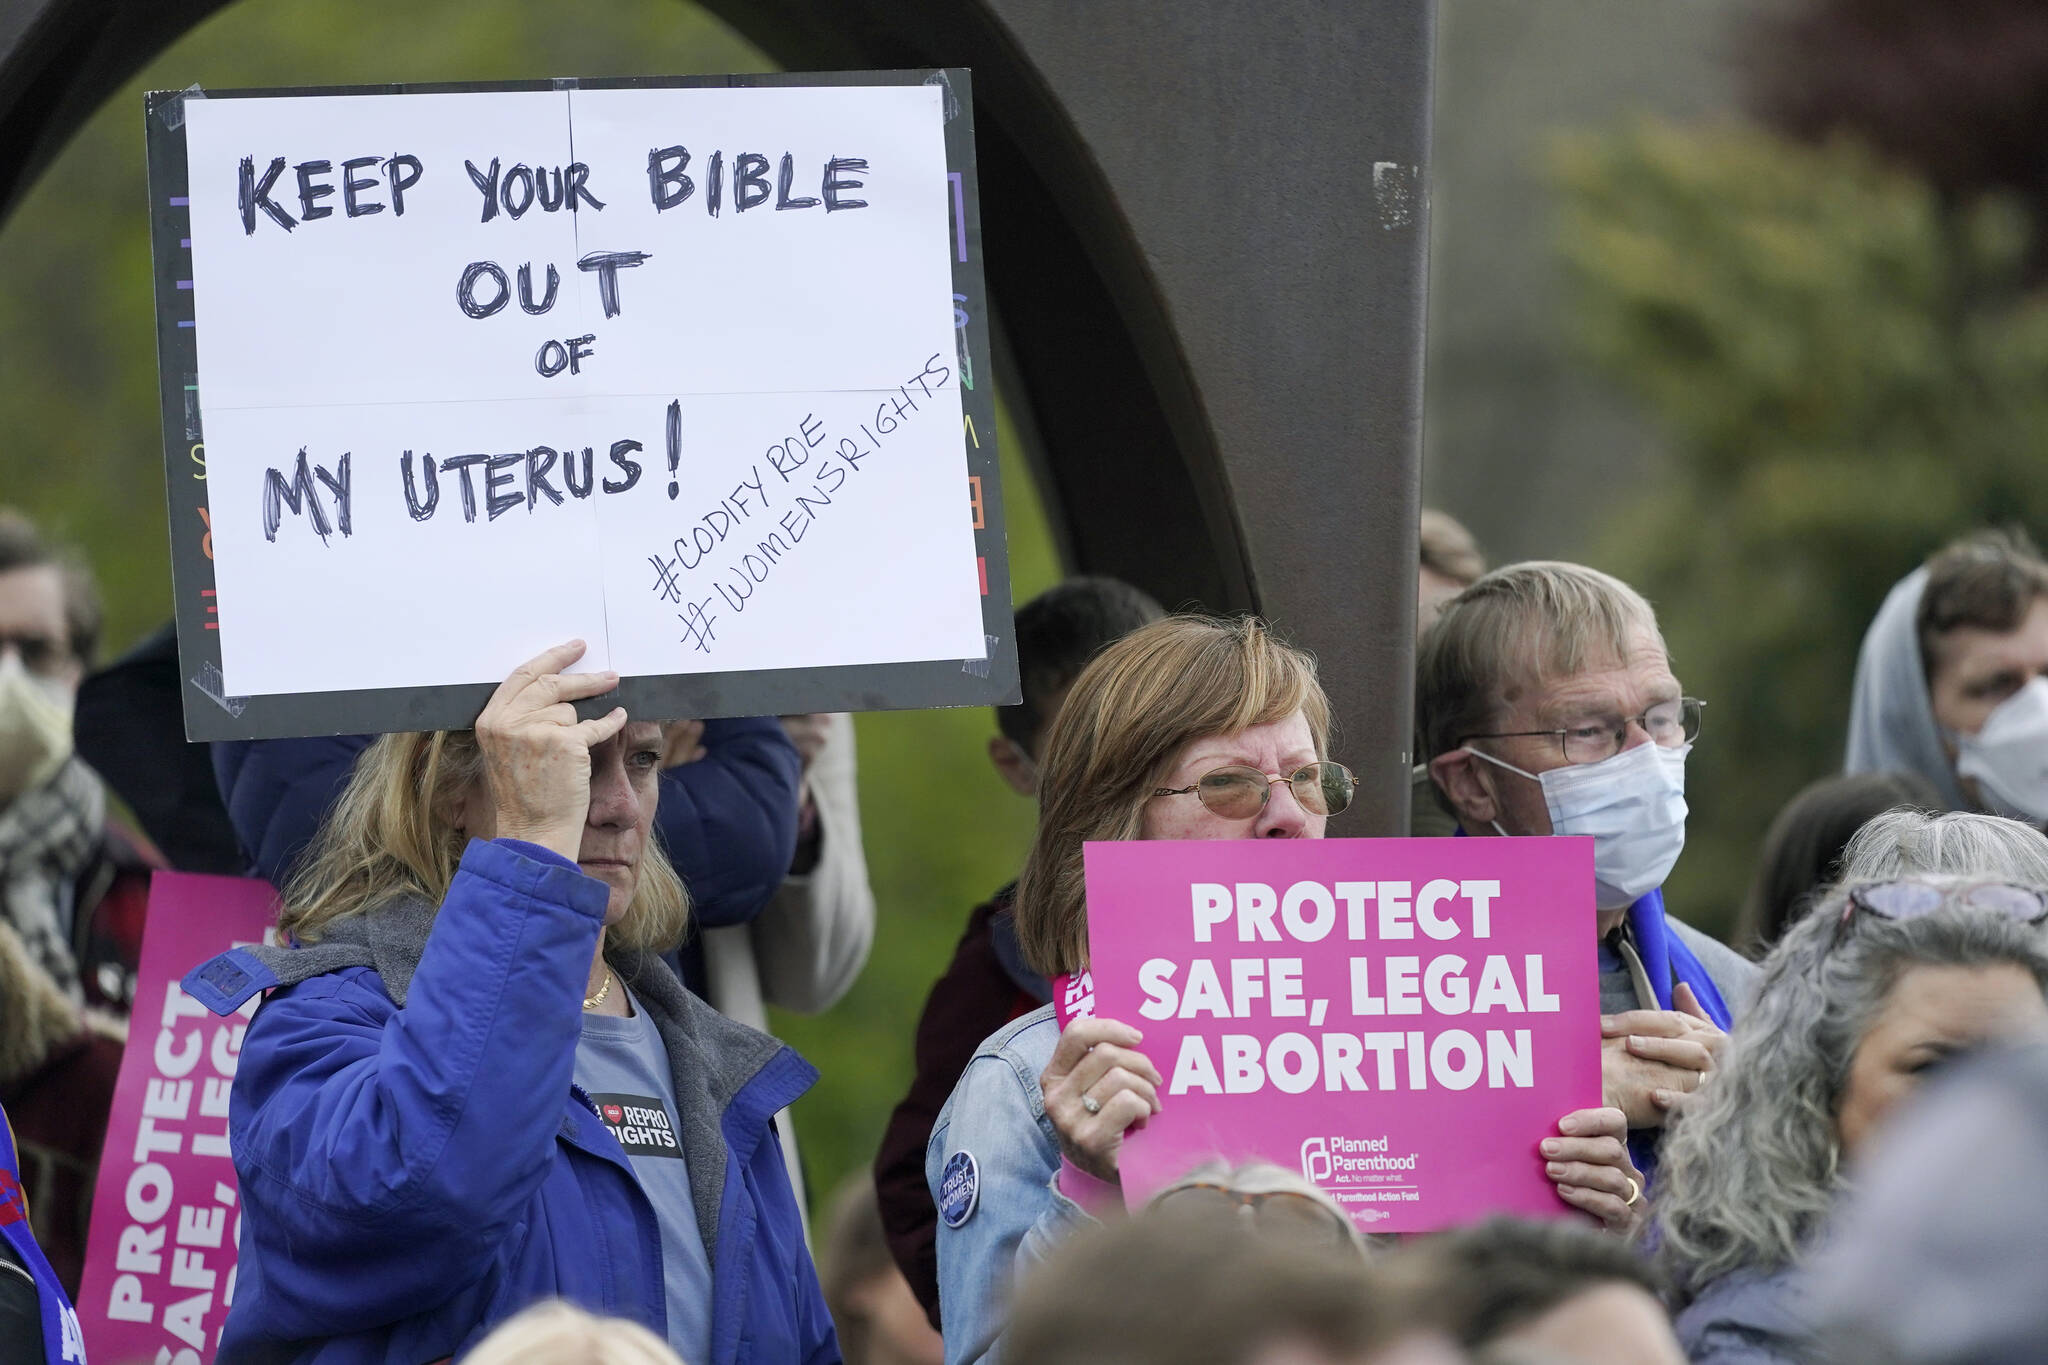 Ted S. Warren / The Associated Press
A person holds a sign that reads “Keep Your Bible out of My Uterus!” on Tuesday during a rally at a park in Seattle in support of abortion rights.